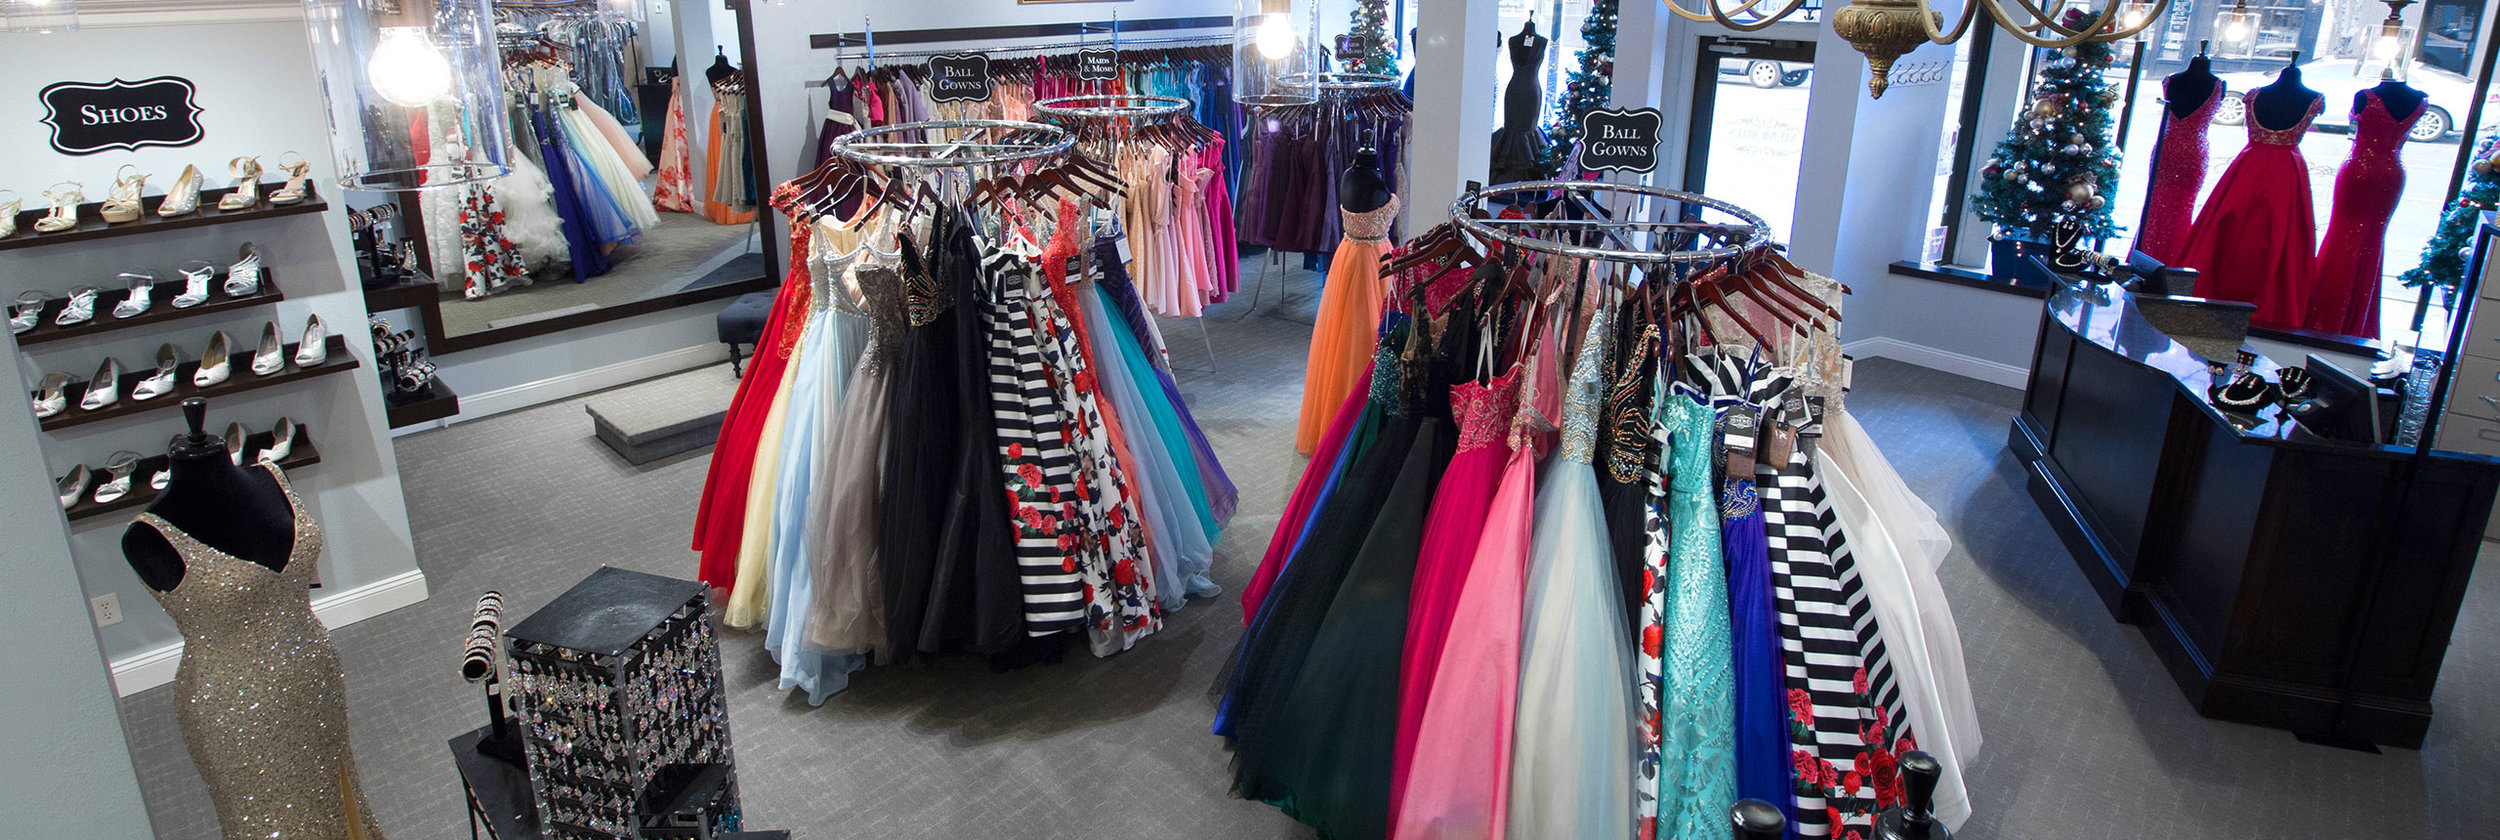 ball gown store near me